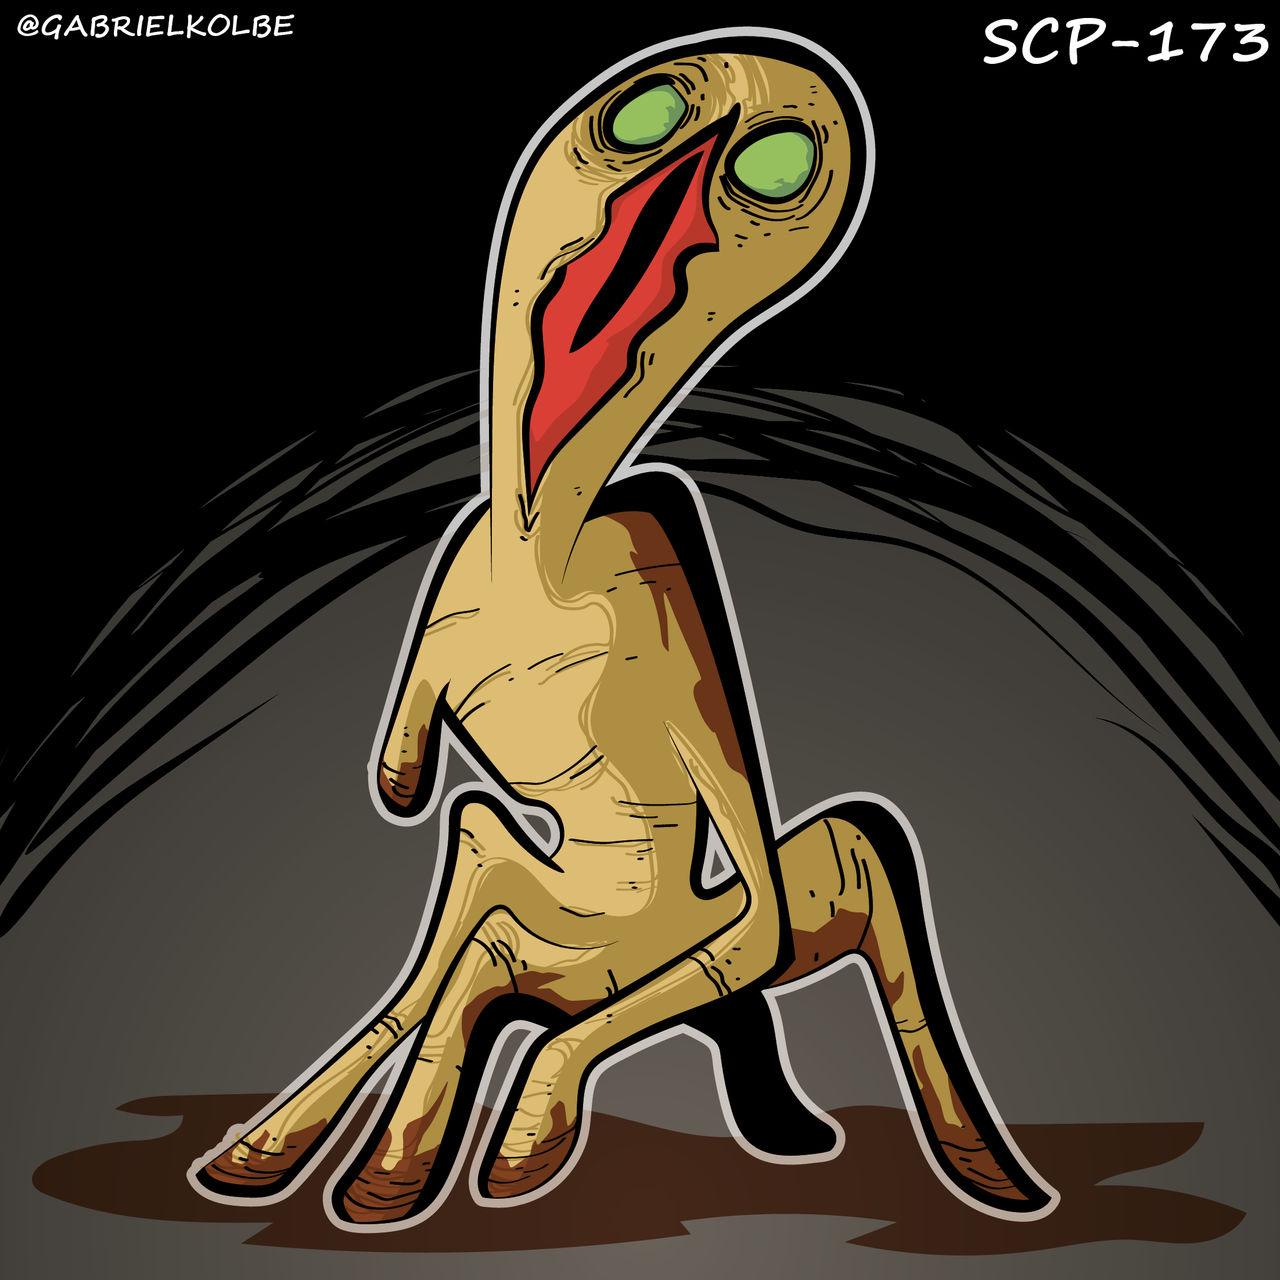 Special Containment Procedures: Item SCP-173 is to be kept in a locked  container at all times. When personnel must enter SCP-173's container, no  fewer than 3 may enter at any time and